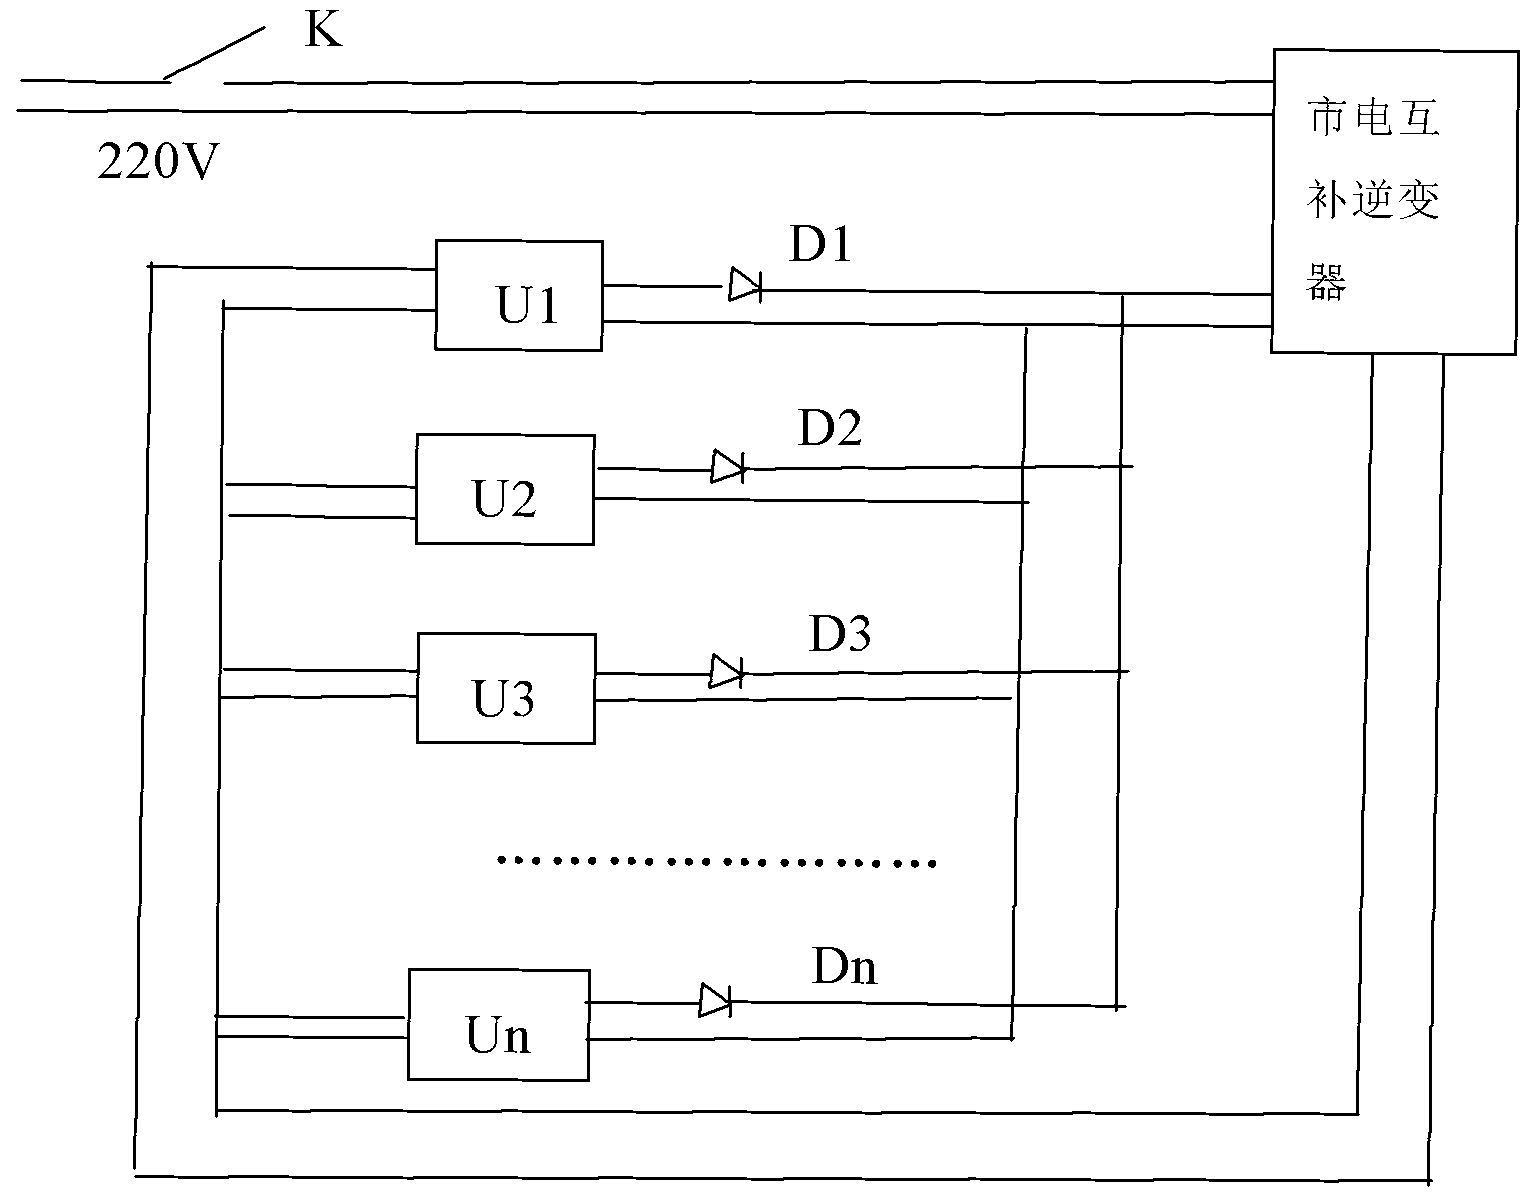 Power supply aging system